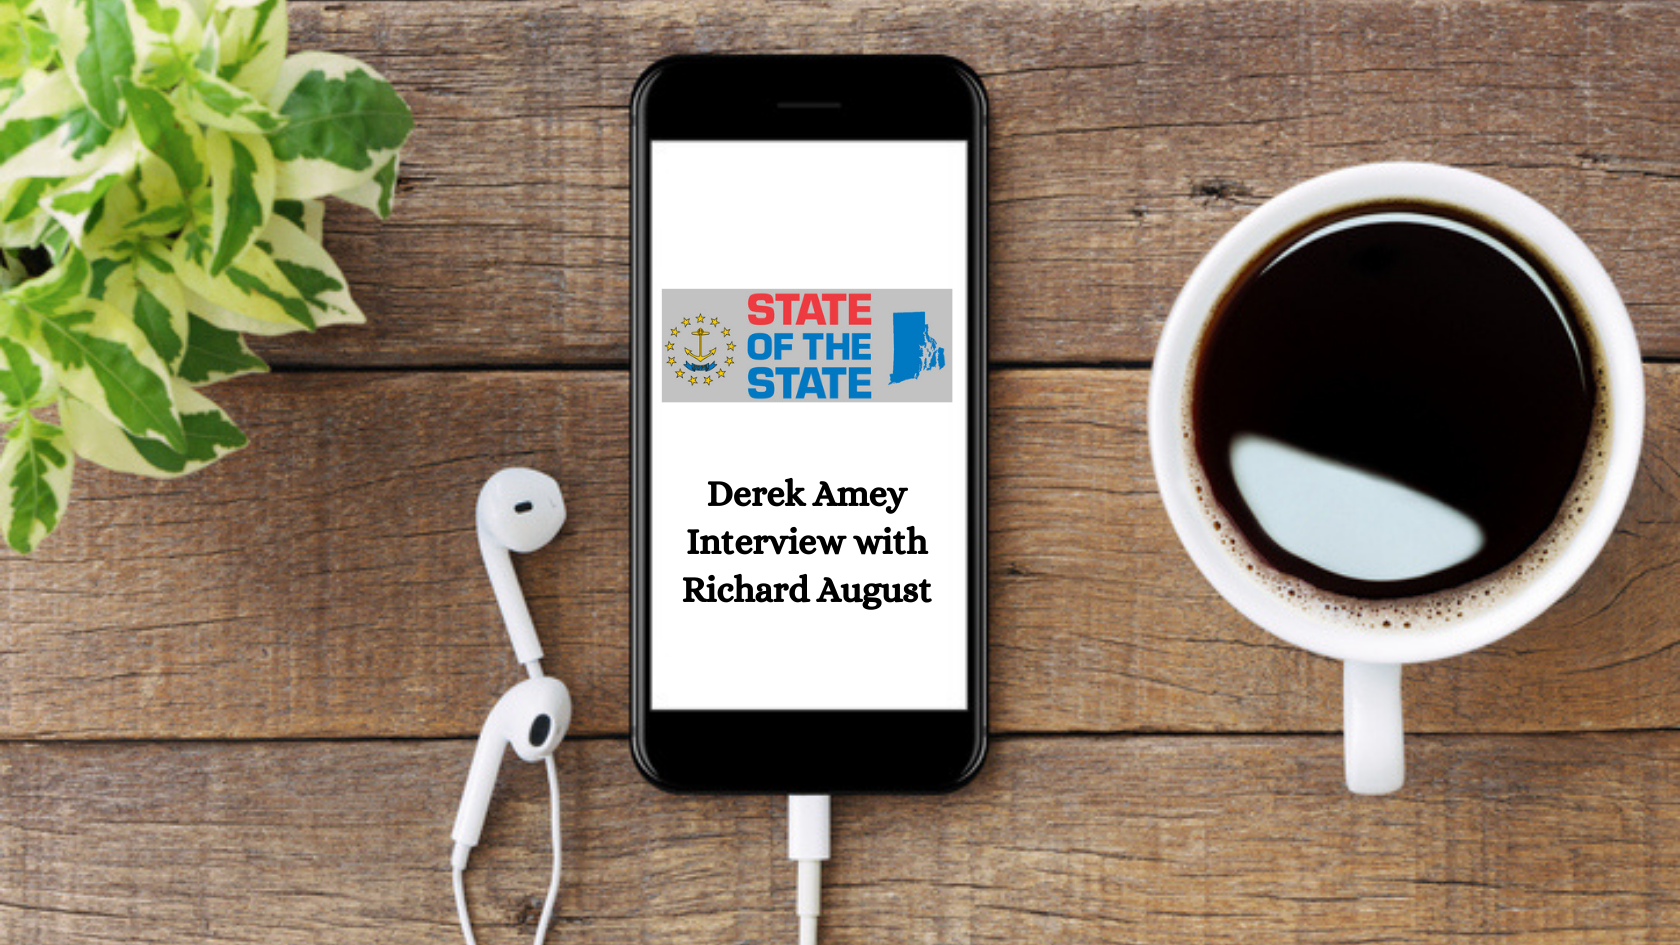 Derek Amey on “State of the State” with Richard August